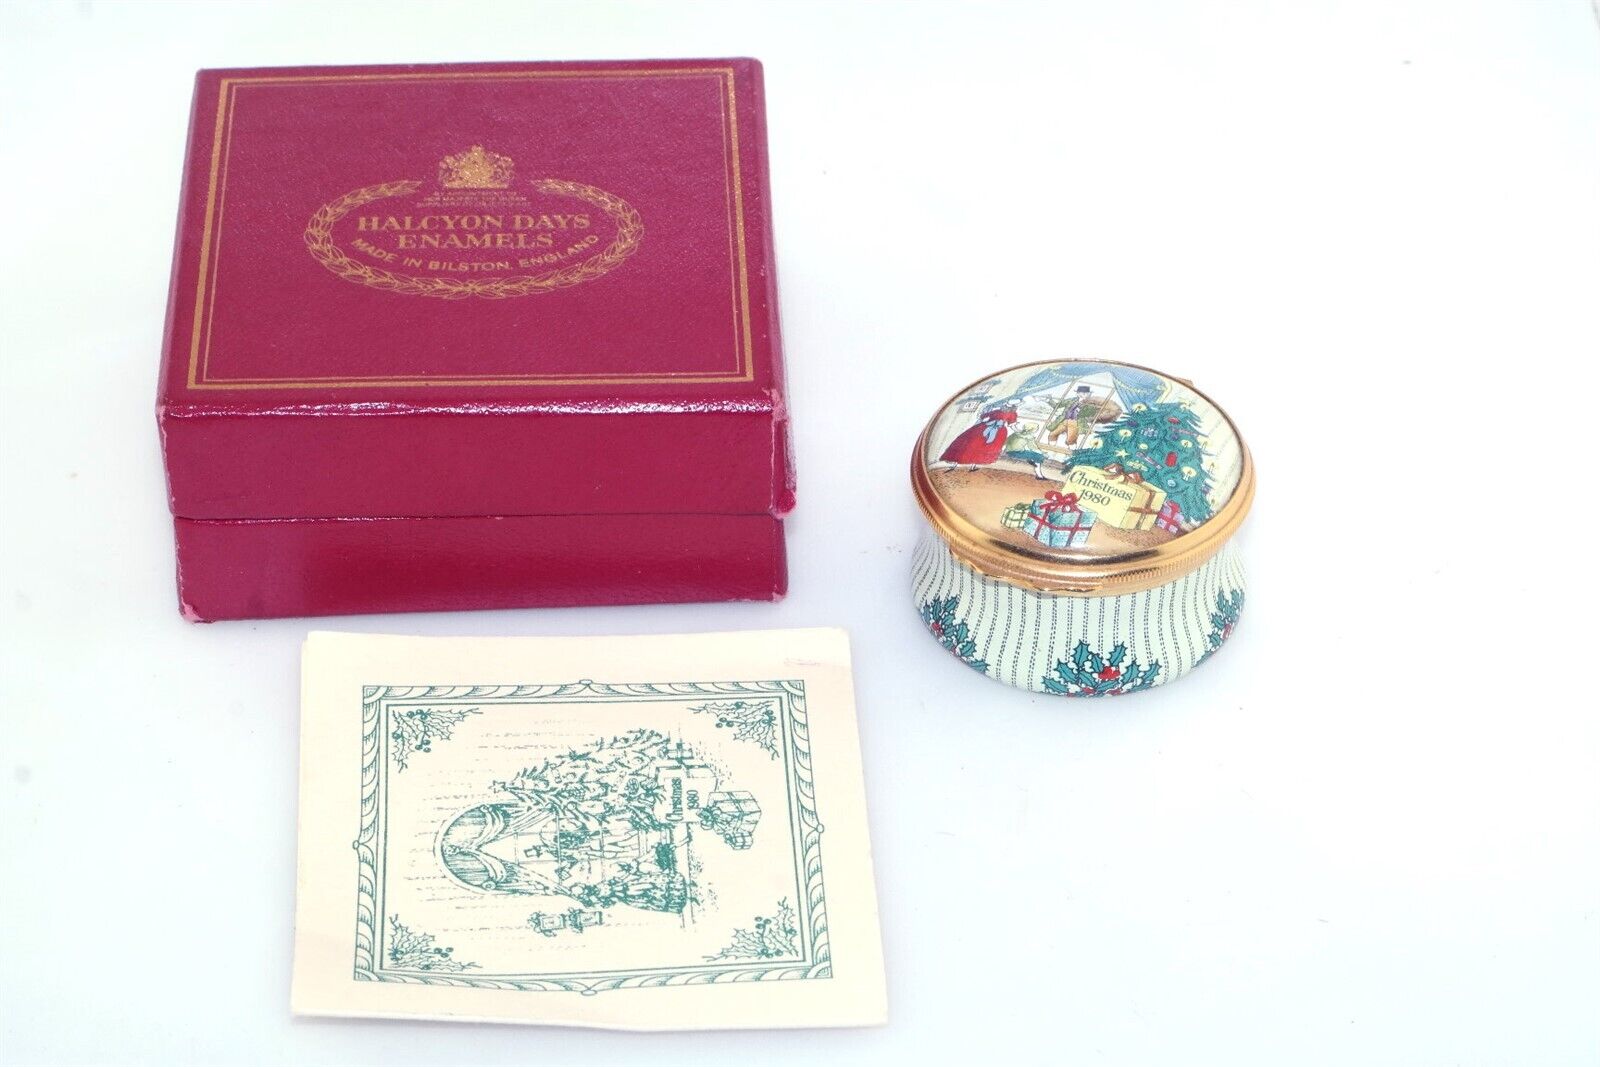 Halcyon Days Enamel Christmas 1980 Trinket Box w Papers Waiting for the Postman